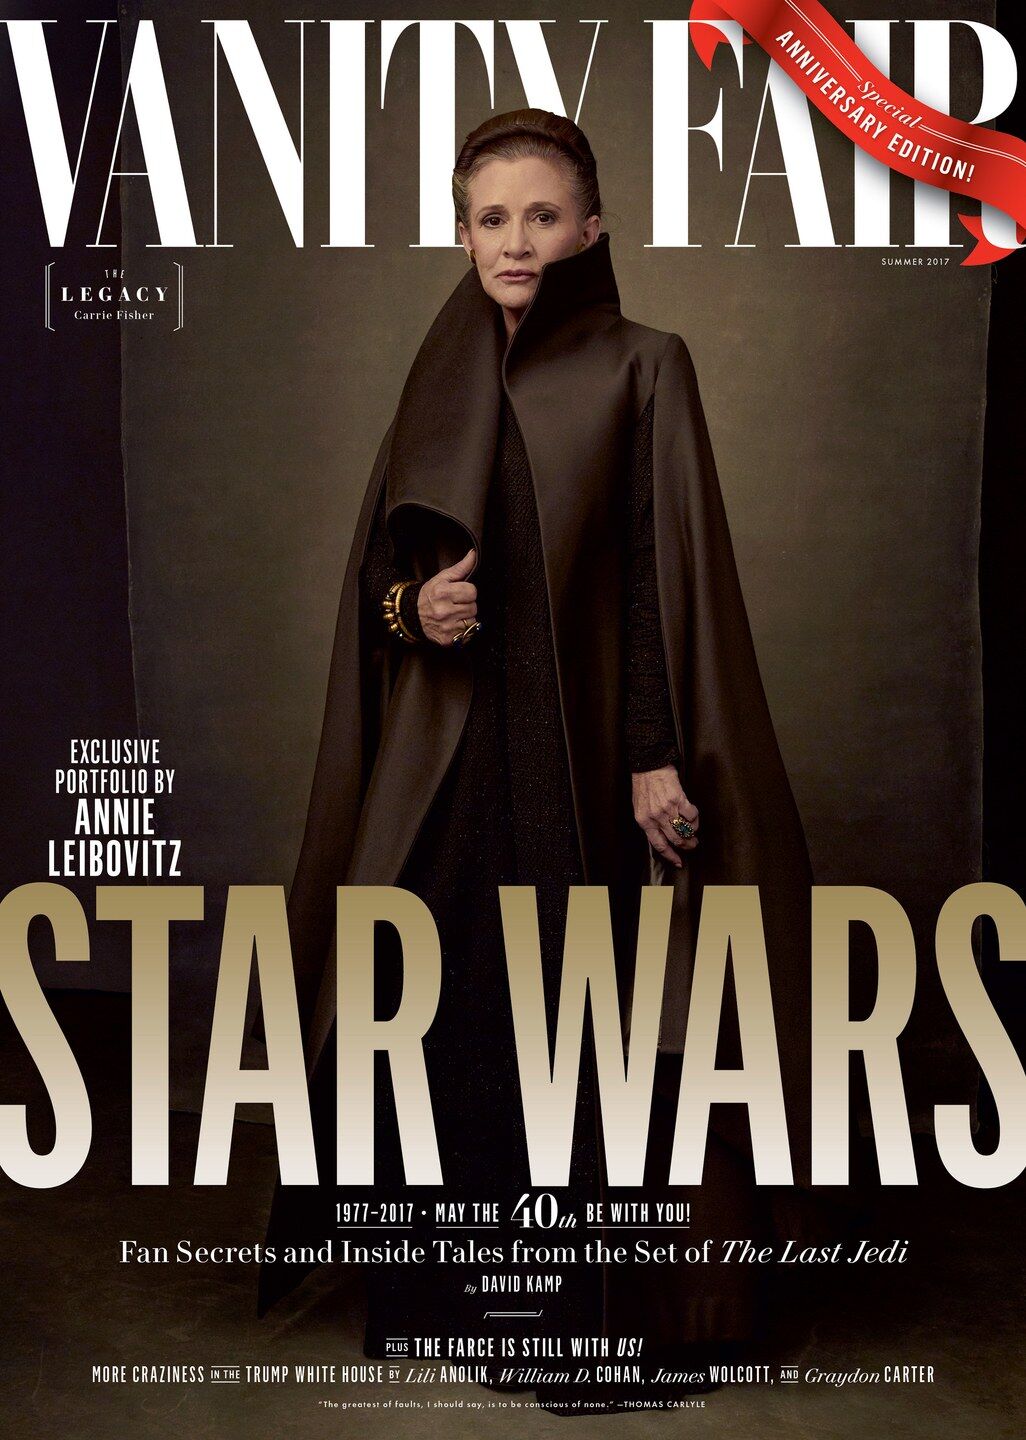 Star Wars Vanity Fair Cover Carrie Fisher